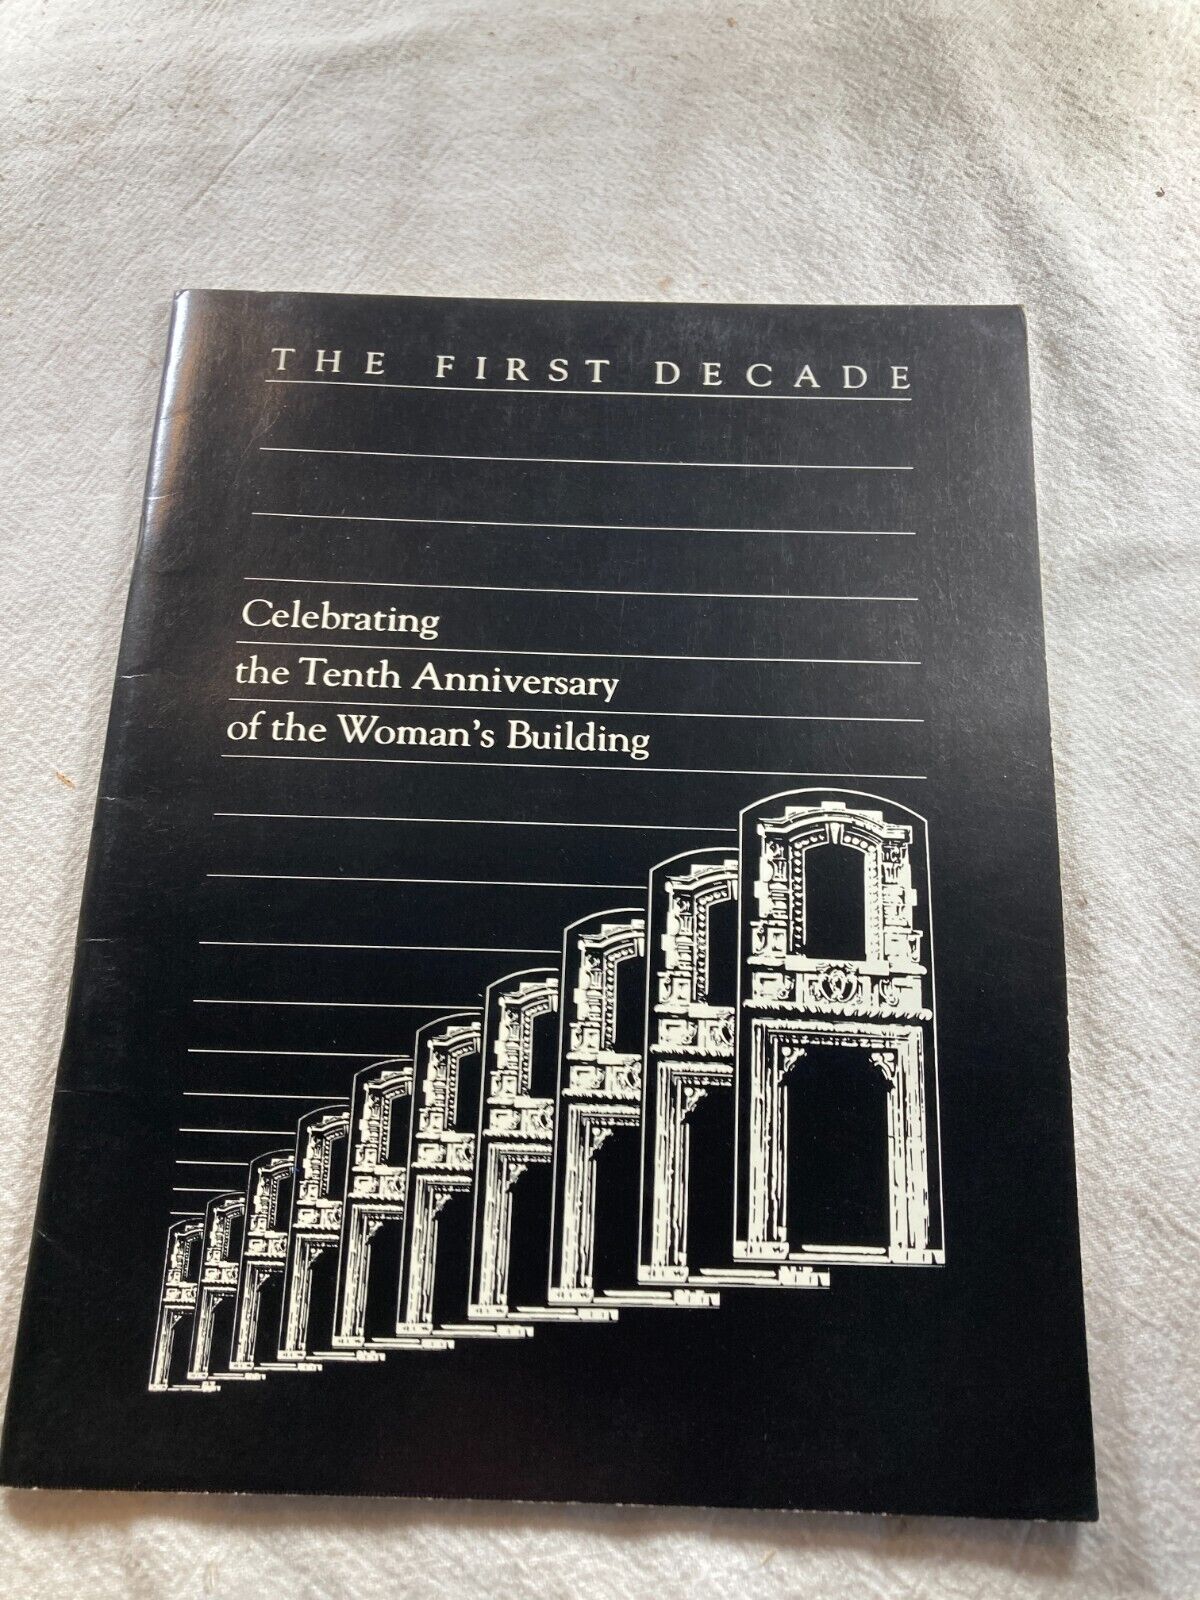 Vintage Zine Magazine The First Decade The Woman's Building 1983